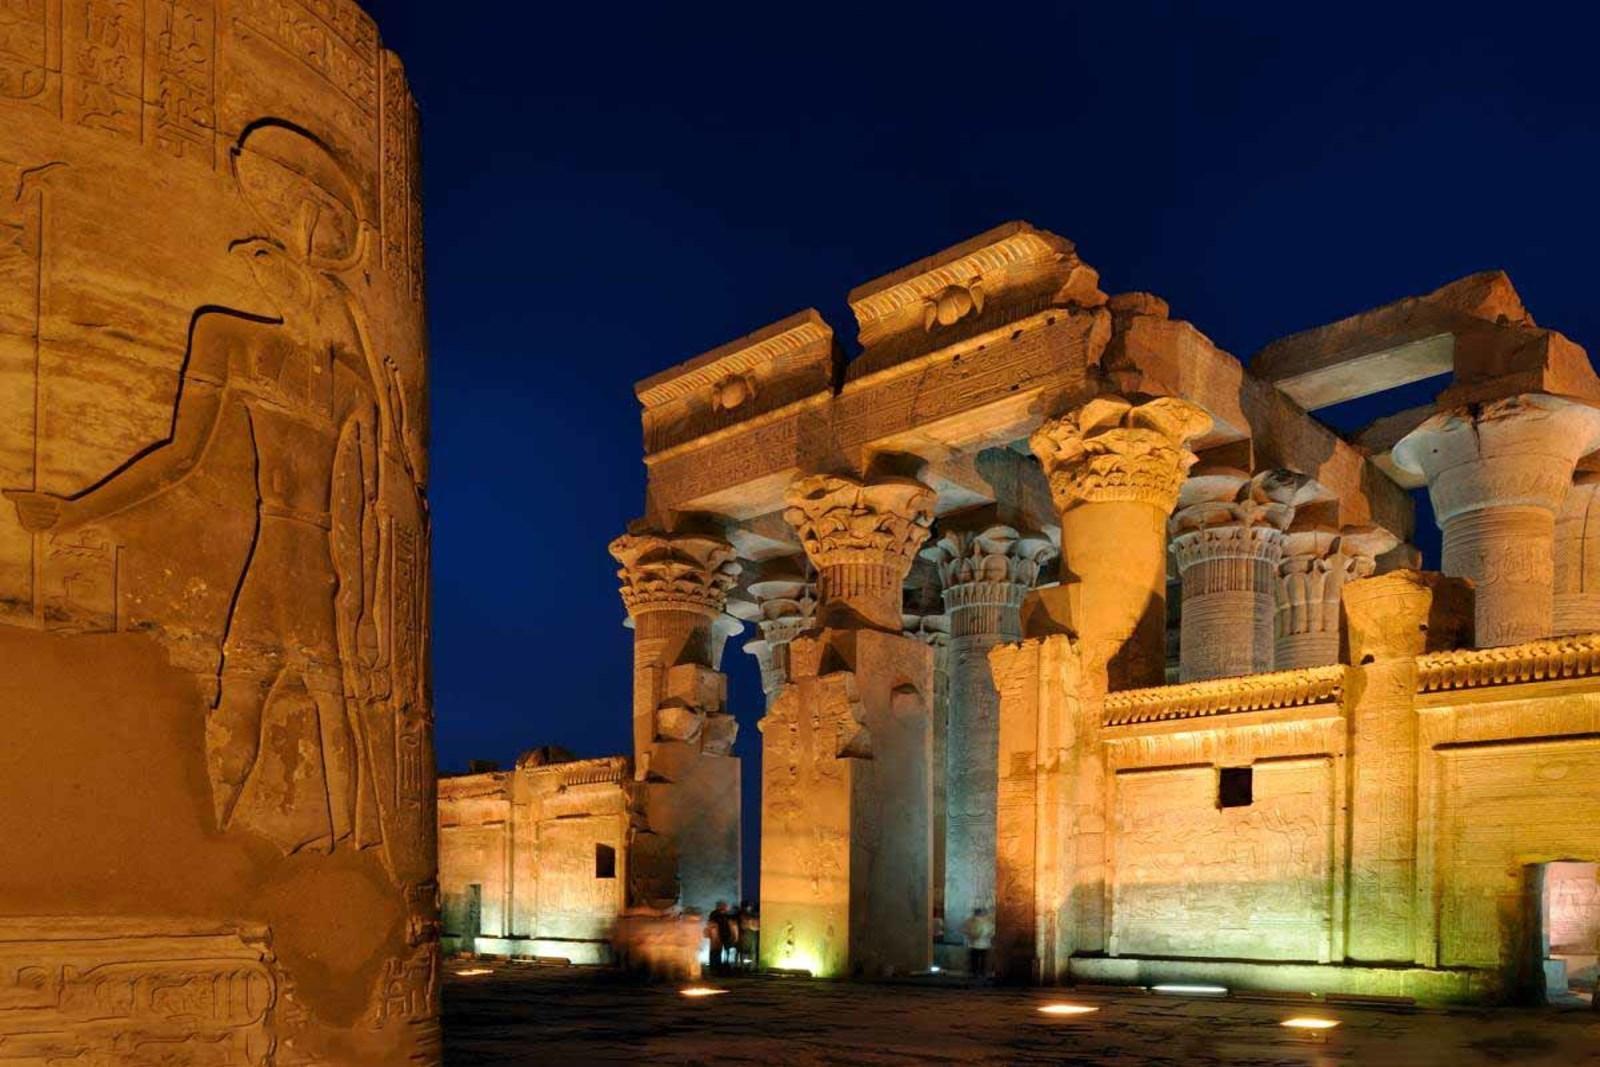 full-day tour from Luxor to the magnificent temples of Edfu and Kom Ombo